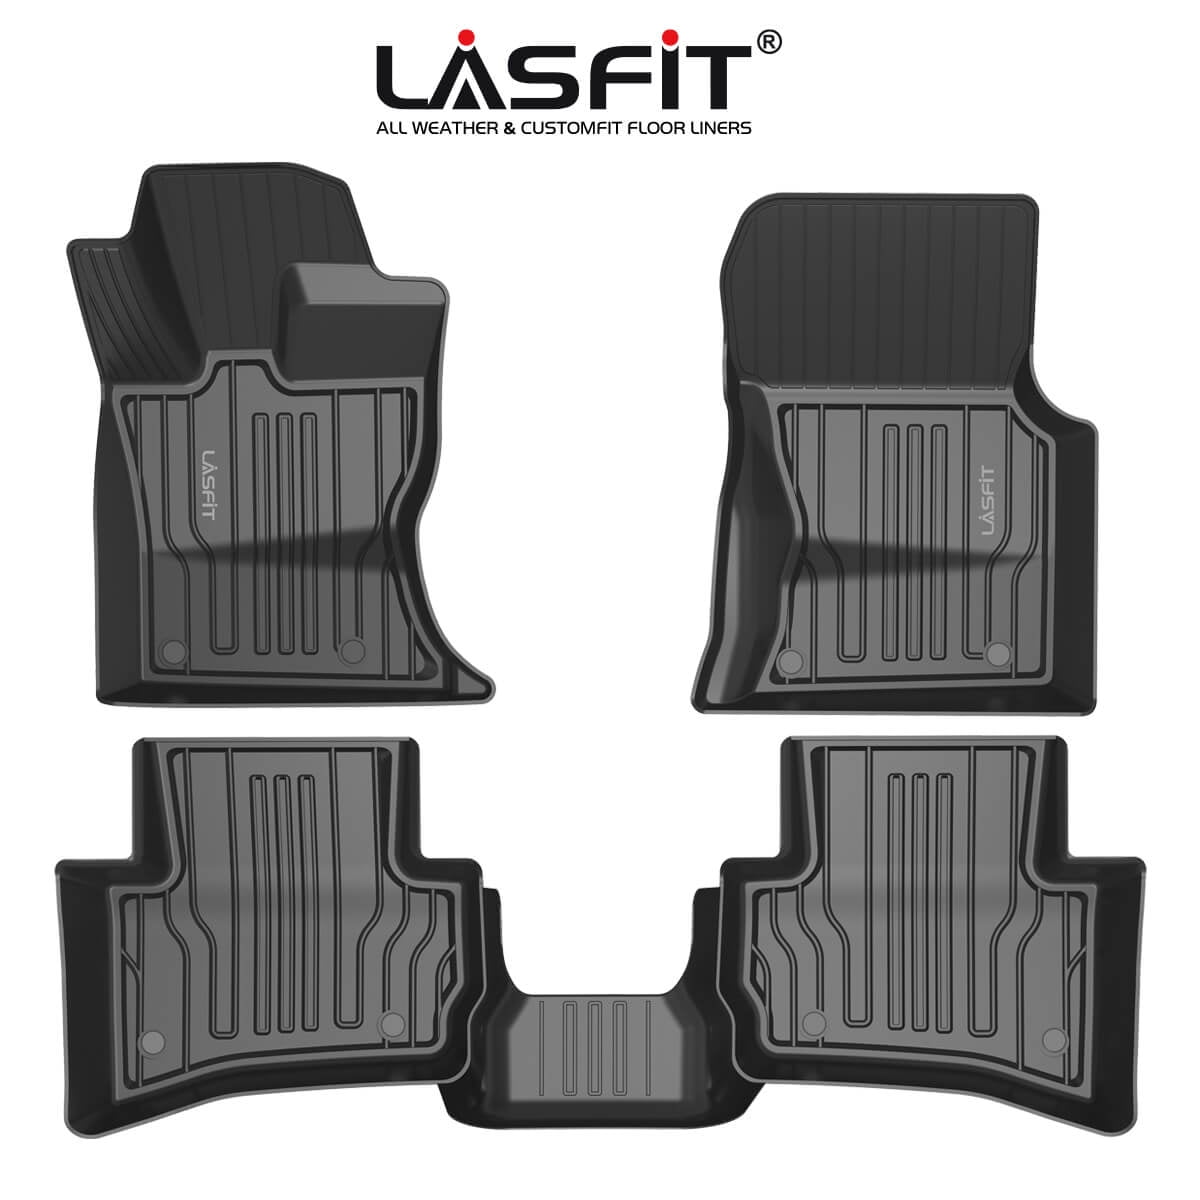 LASFIT All Weather Guard 1st+2nd Rows Sets TPE Custom Car Floor Liners Floor Mats Fit for Cadillac XT5 2016 2017 2018 2019 2020 2021